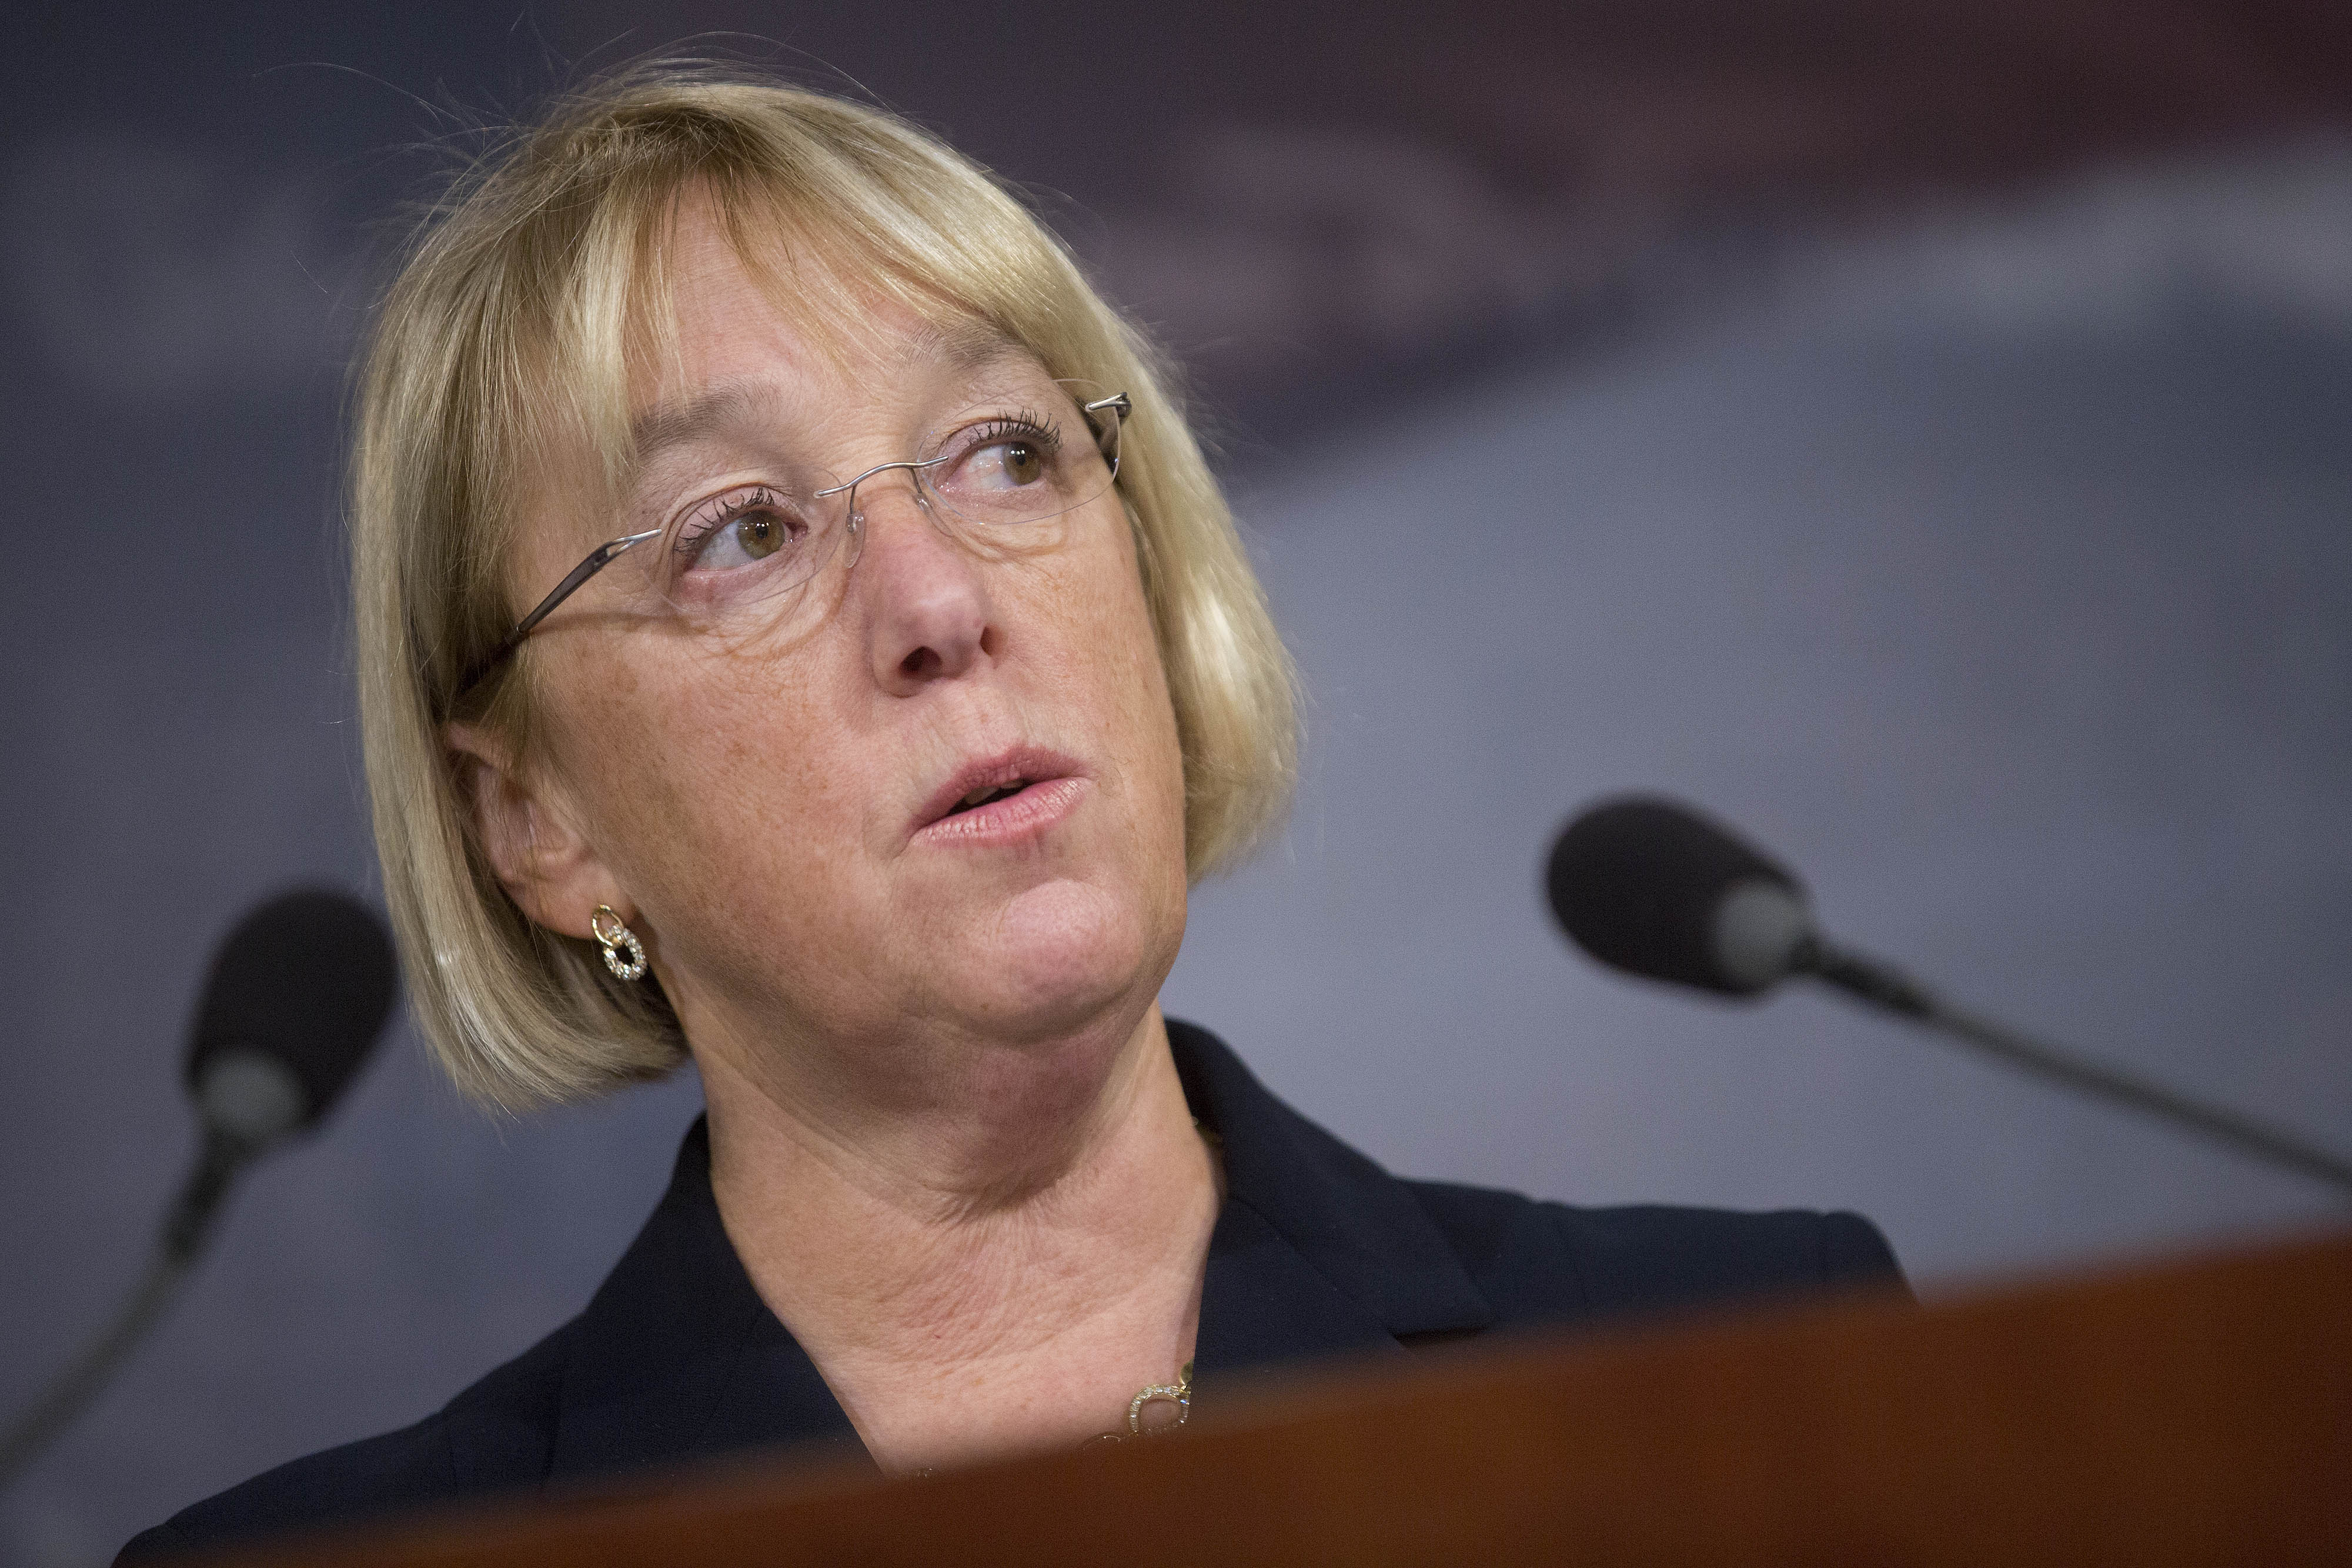 Sen. Patty Murray (D-Wash.), who introduced a bill to increase access to emergency contraception. (Bloomberg&mdash;Bloomberg via Getty Images)